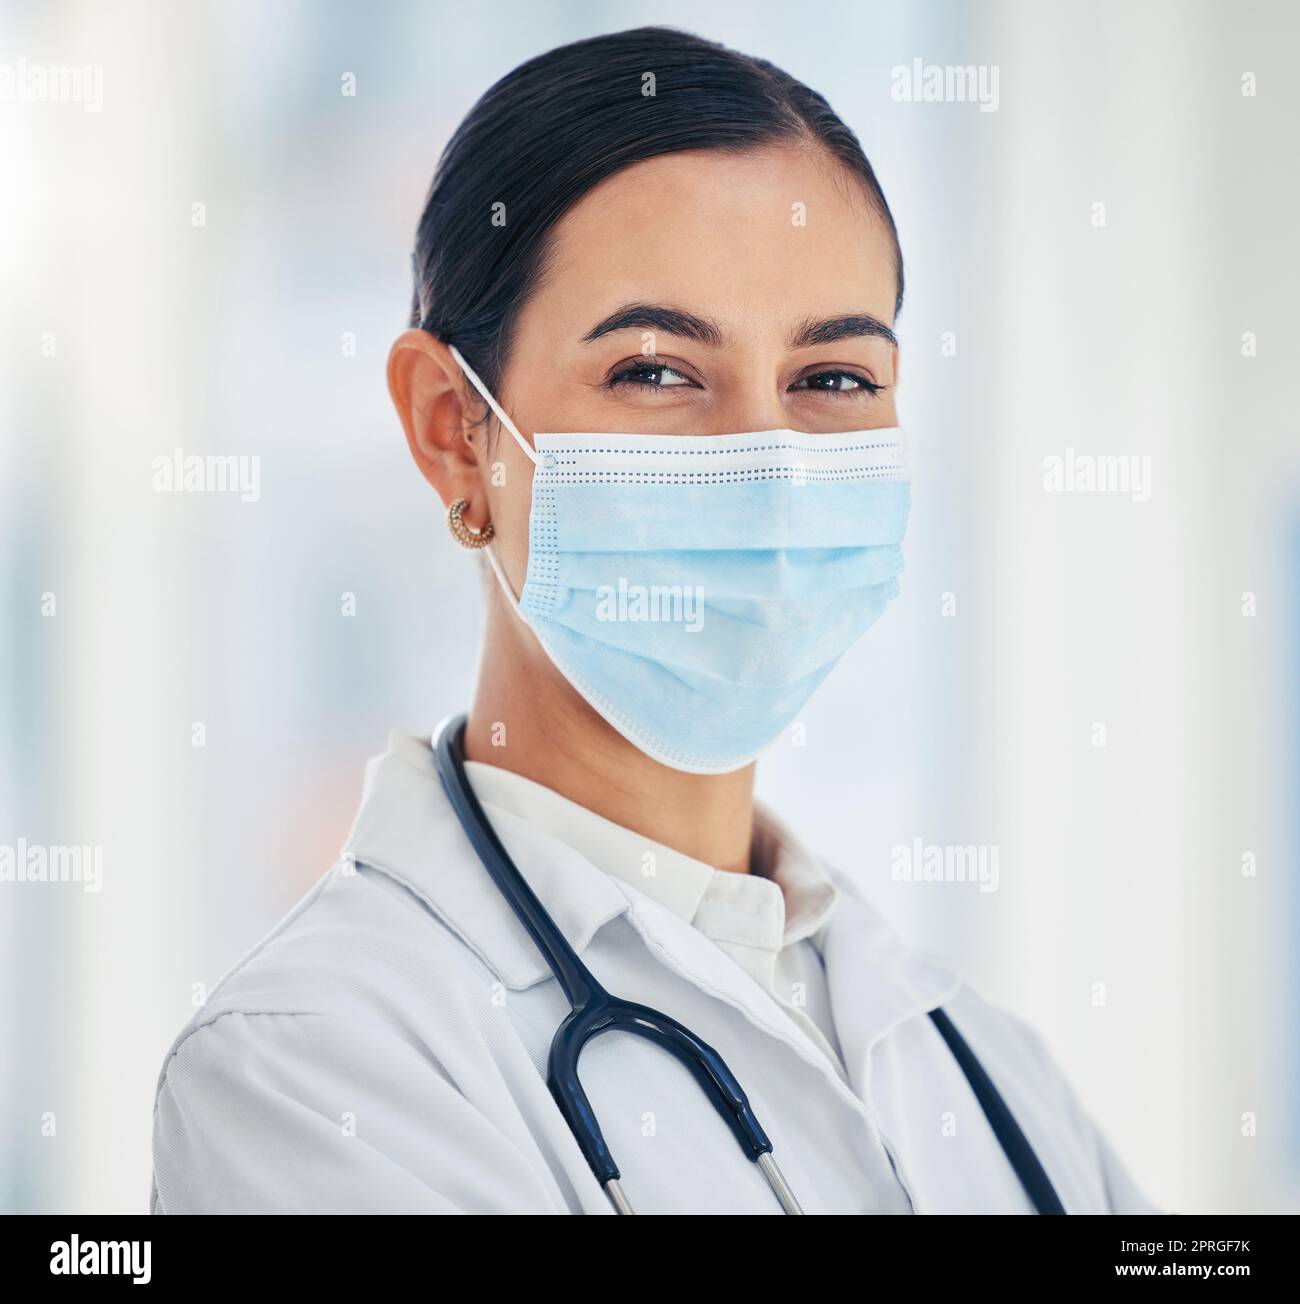 Covid doctor with face mask for safety, medicine and hygiene while working in a medical hospital or clinic. Portrait of woman nurse, healthcare expert and professional worker in corona virus pandemic Stock Photo